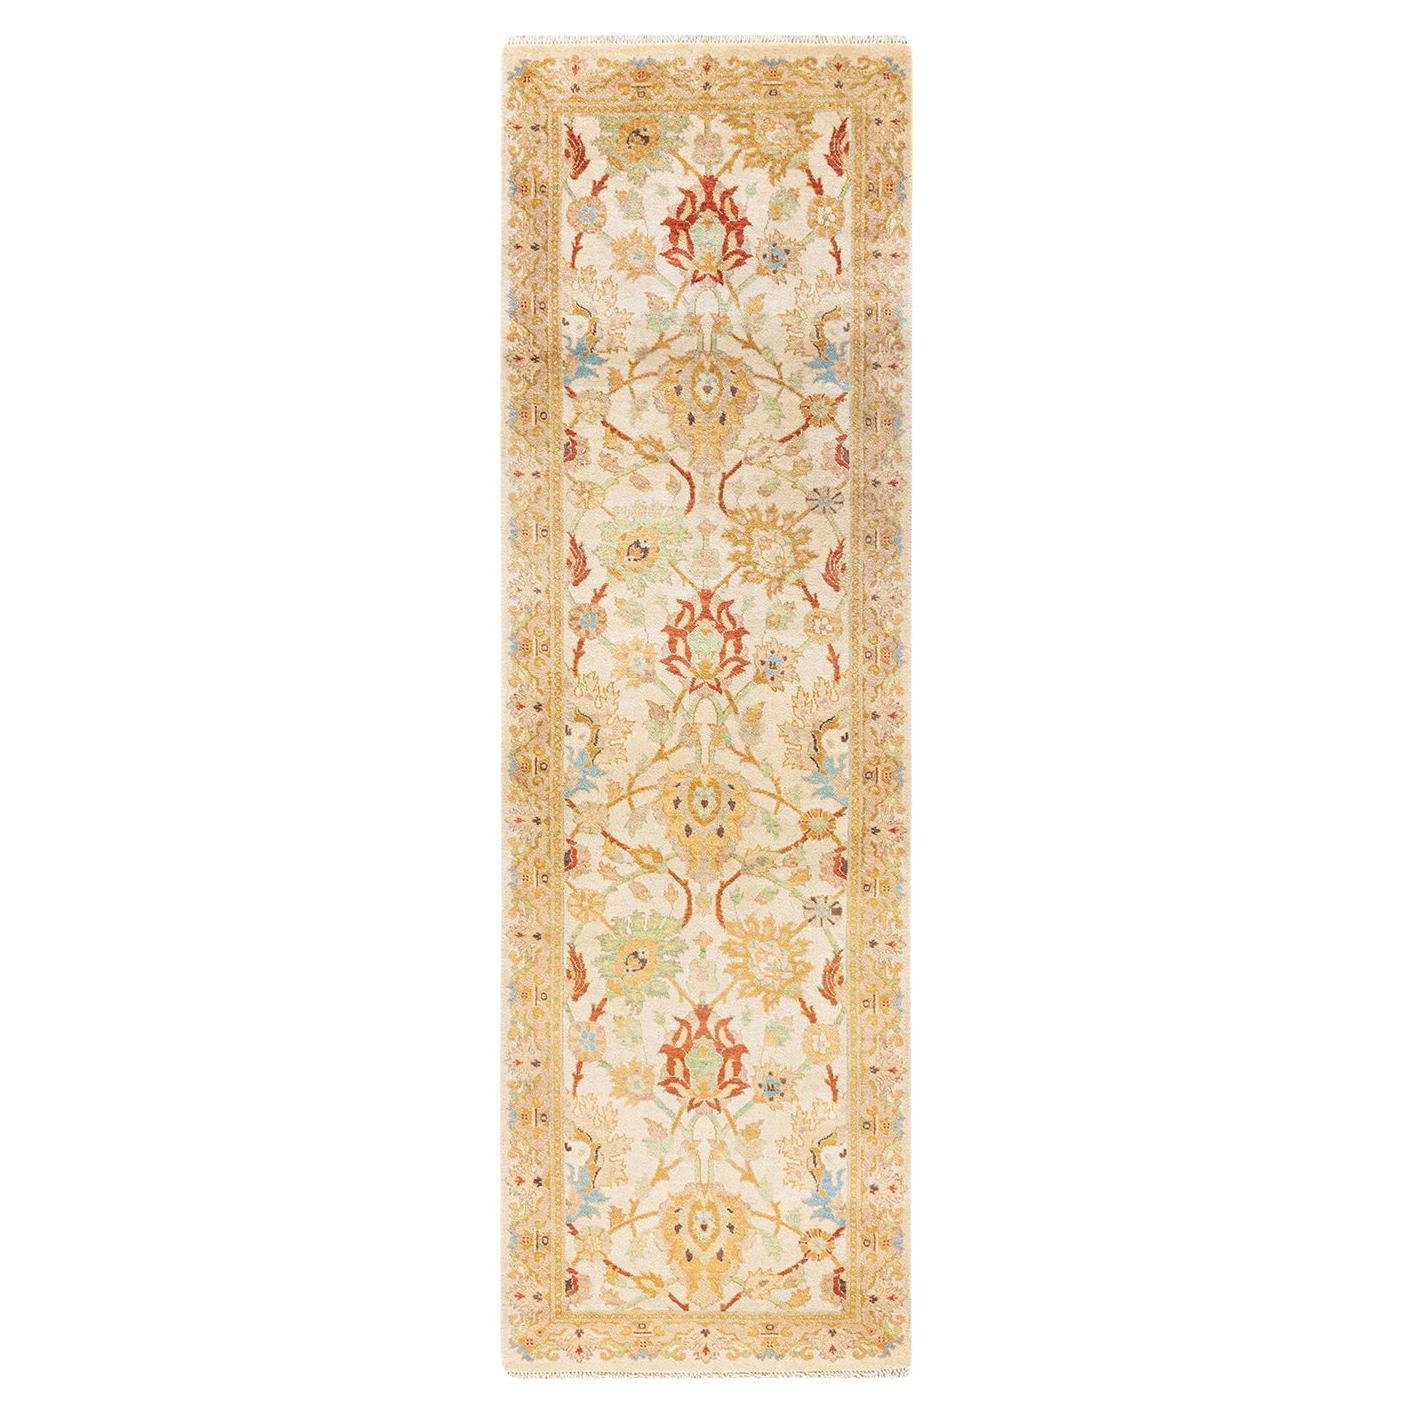 Contemporary Eclectic Hand Knotted Wool Ivory Runner